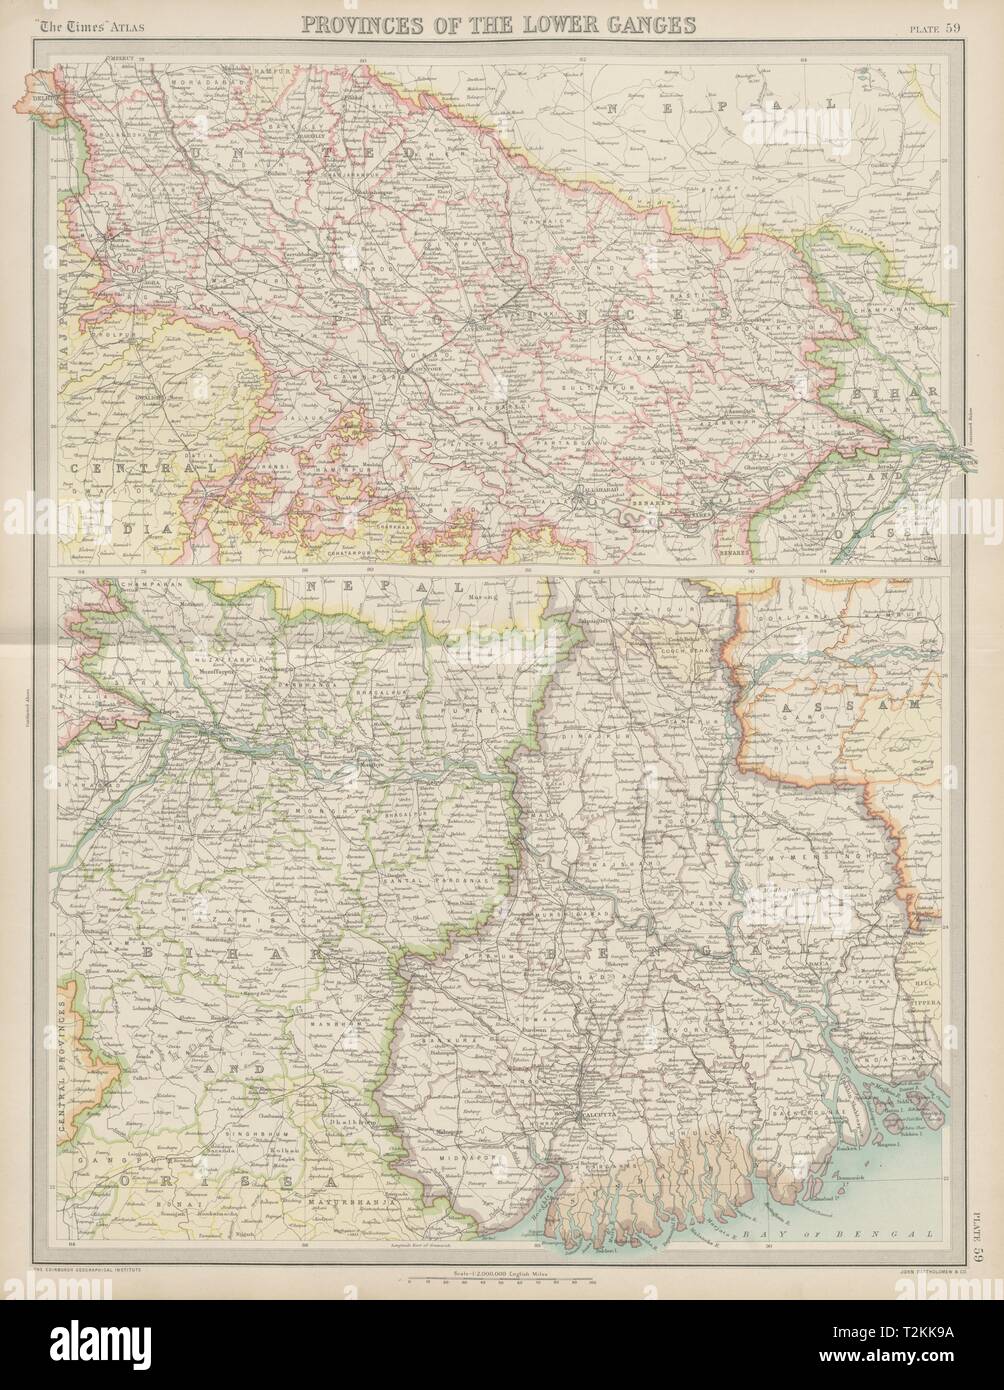 British India. Lower Ganges. United Provinces Bihar Bengal. TIMES 1922 old map Stock Photo